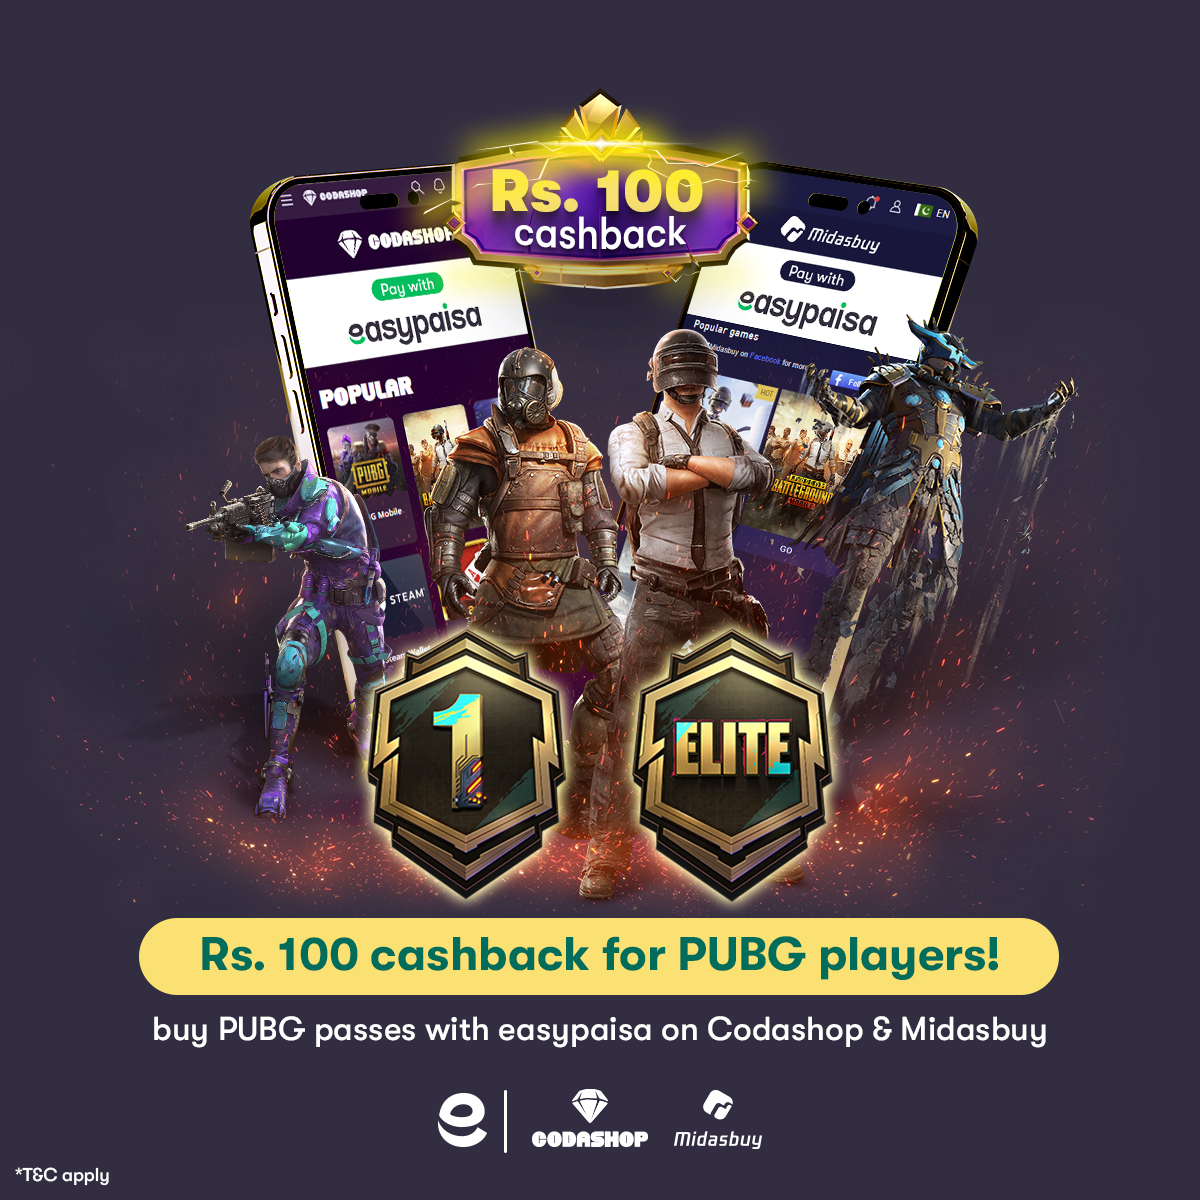 Excited for new season?! 😍🎮
Purchase Elite or Royale Pass on Codashop or Midasbuy and pay with easypaisa to get Rs. 100 exclusive cashback! 😱

Get your pass now: bit.ly/3P5n3cX 
Install easypaisa to pay: bit.ly/3jt1LVN

For more info: bit.ly/3oUOkEa